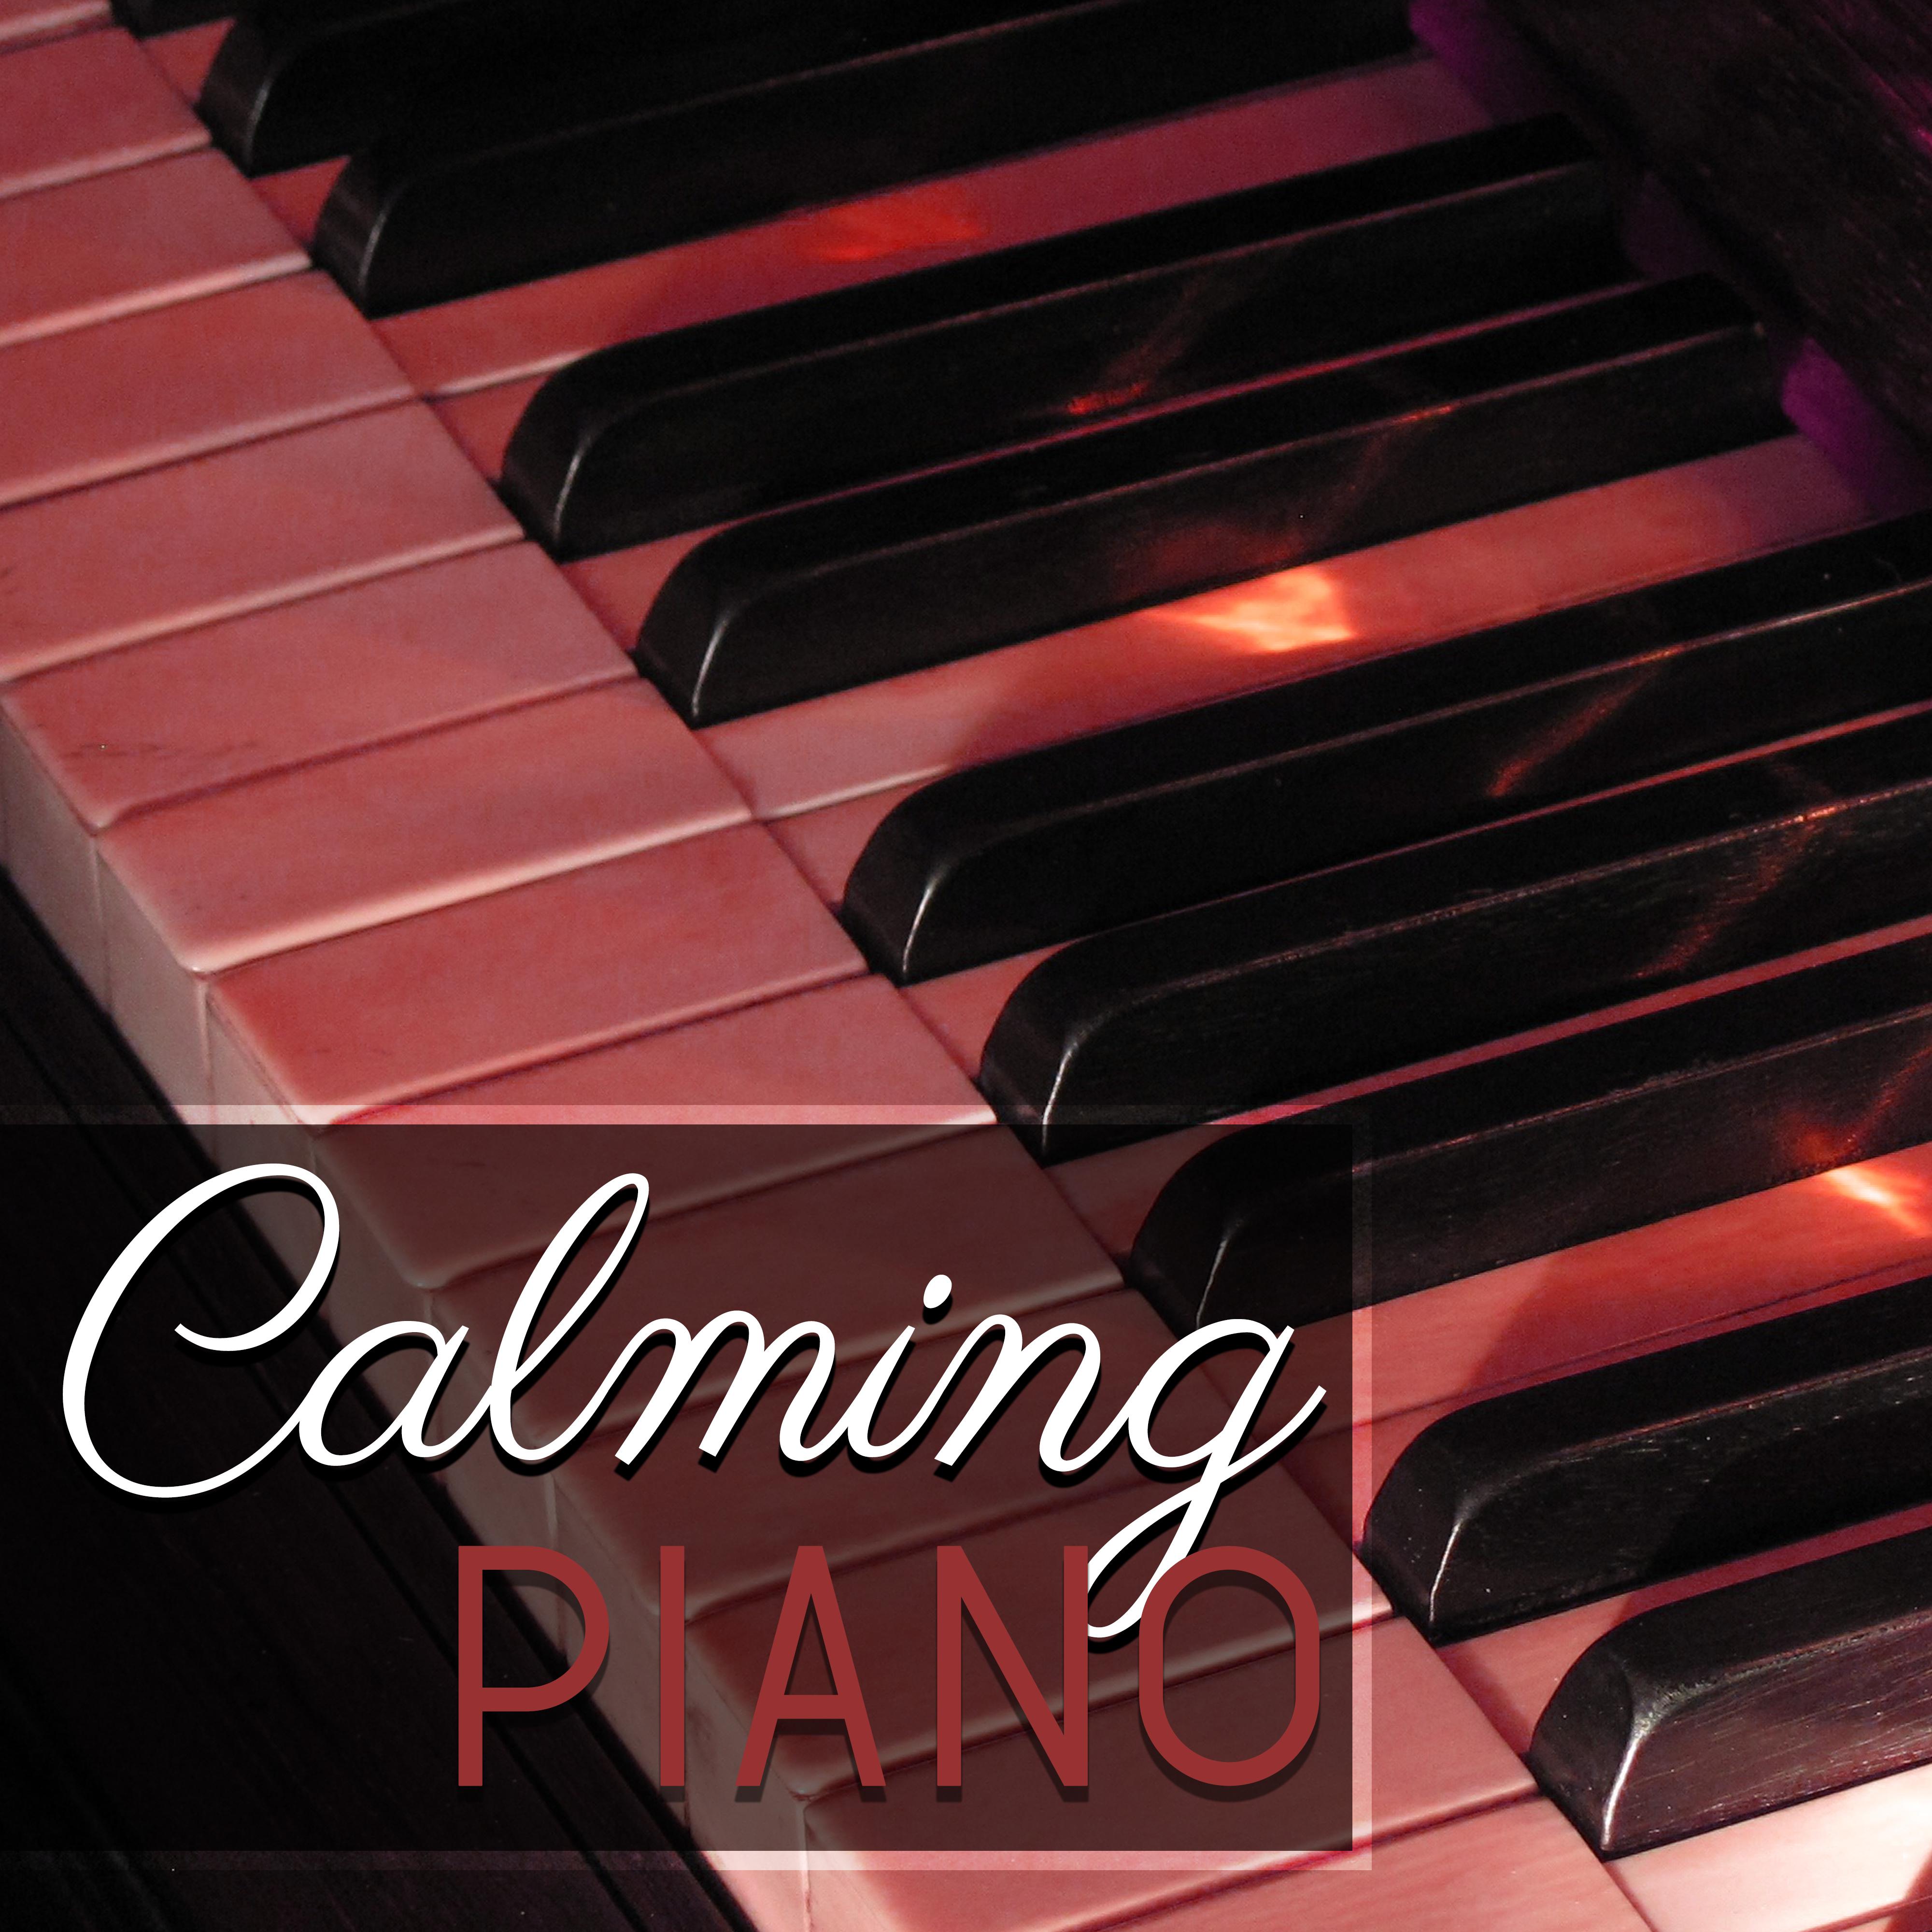 Calming Piano – Instrumental Jazz Music, Relaxation Songs, Smooth Jazz, Chillout, Soft Music for Rest